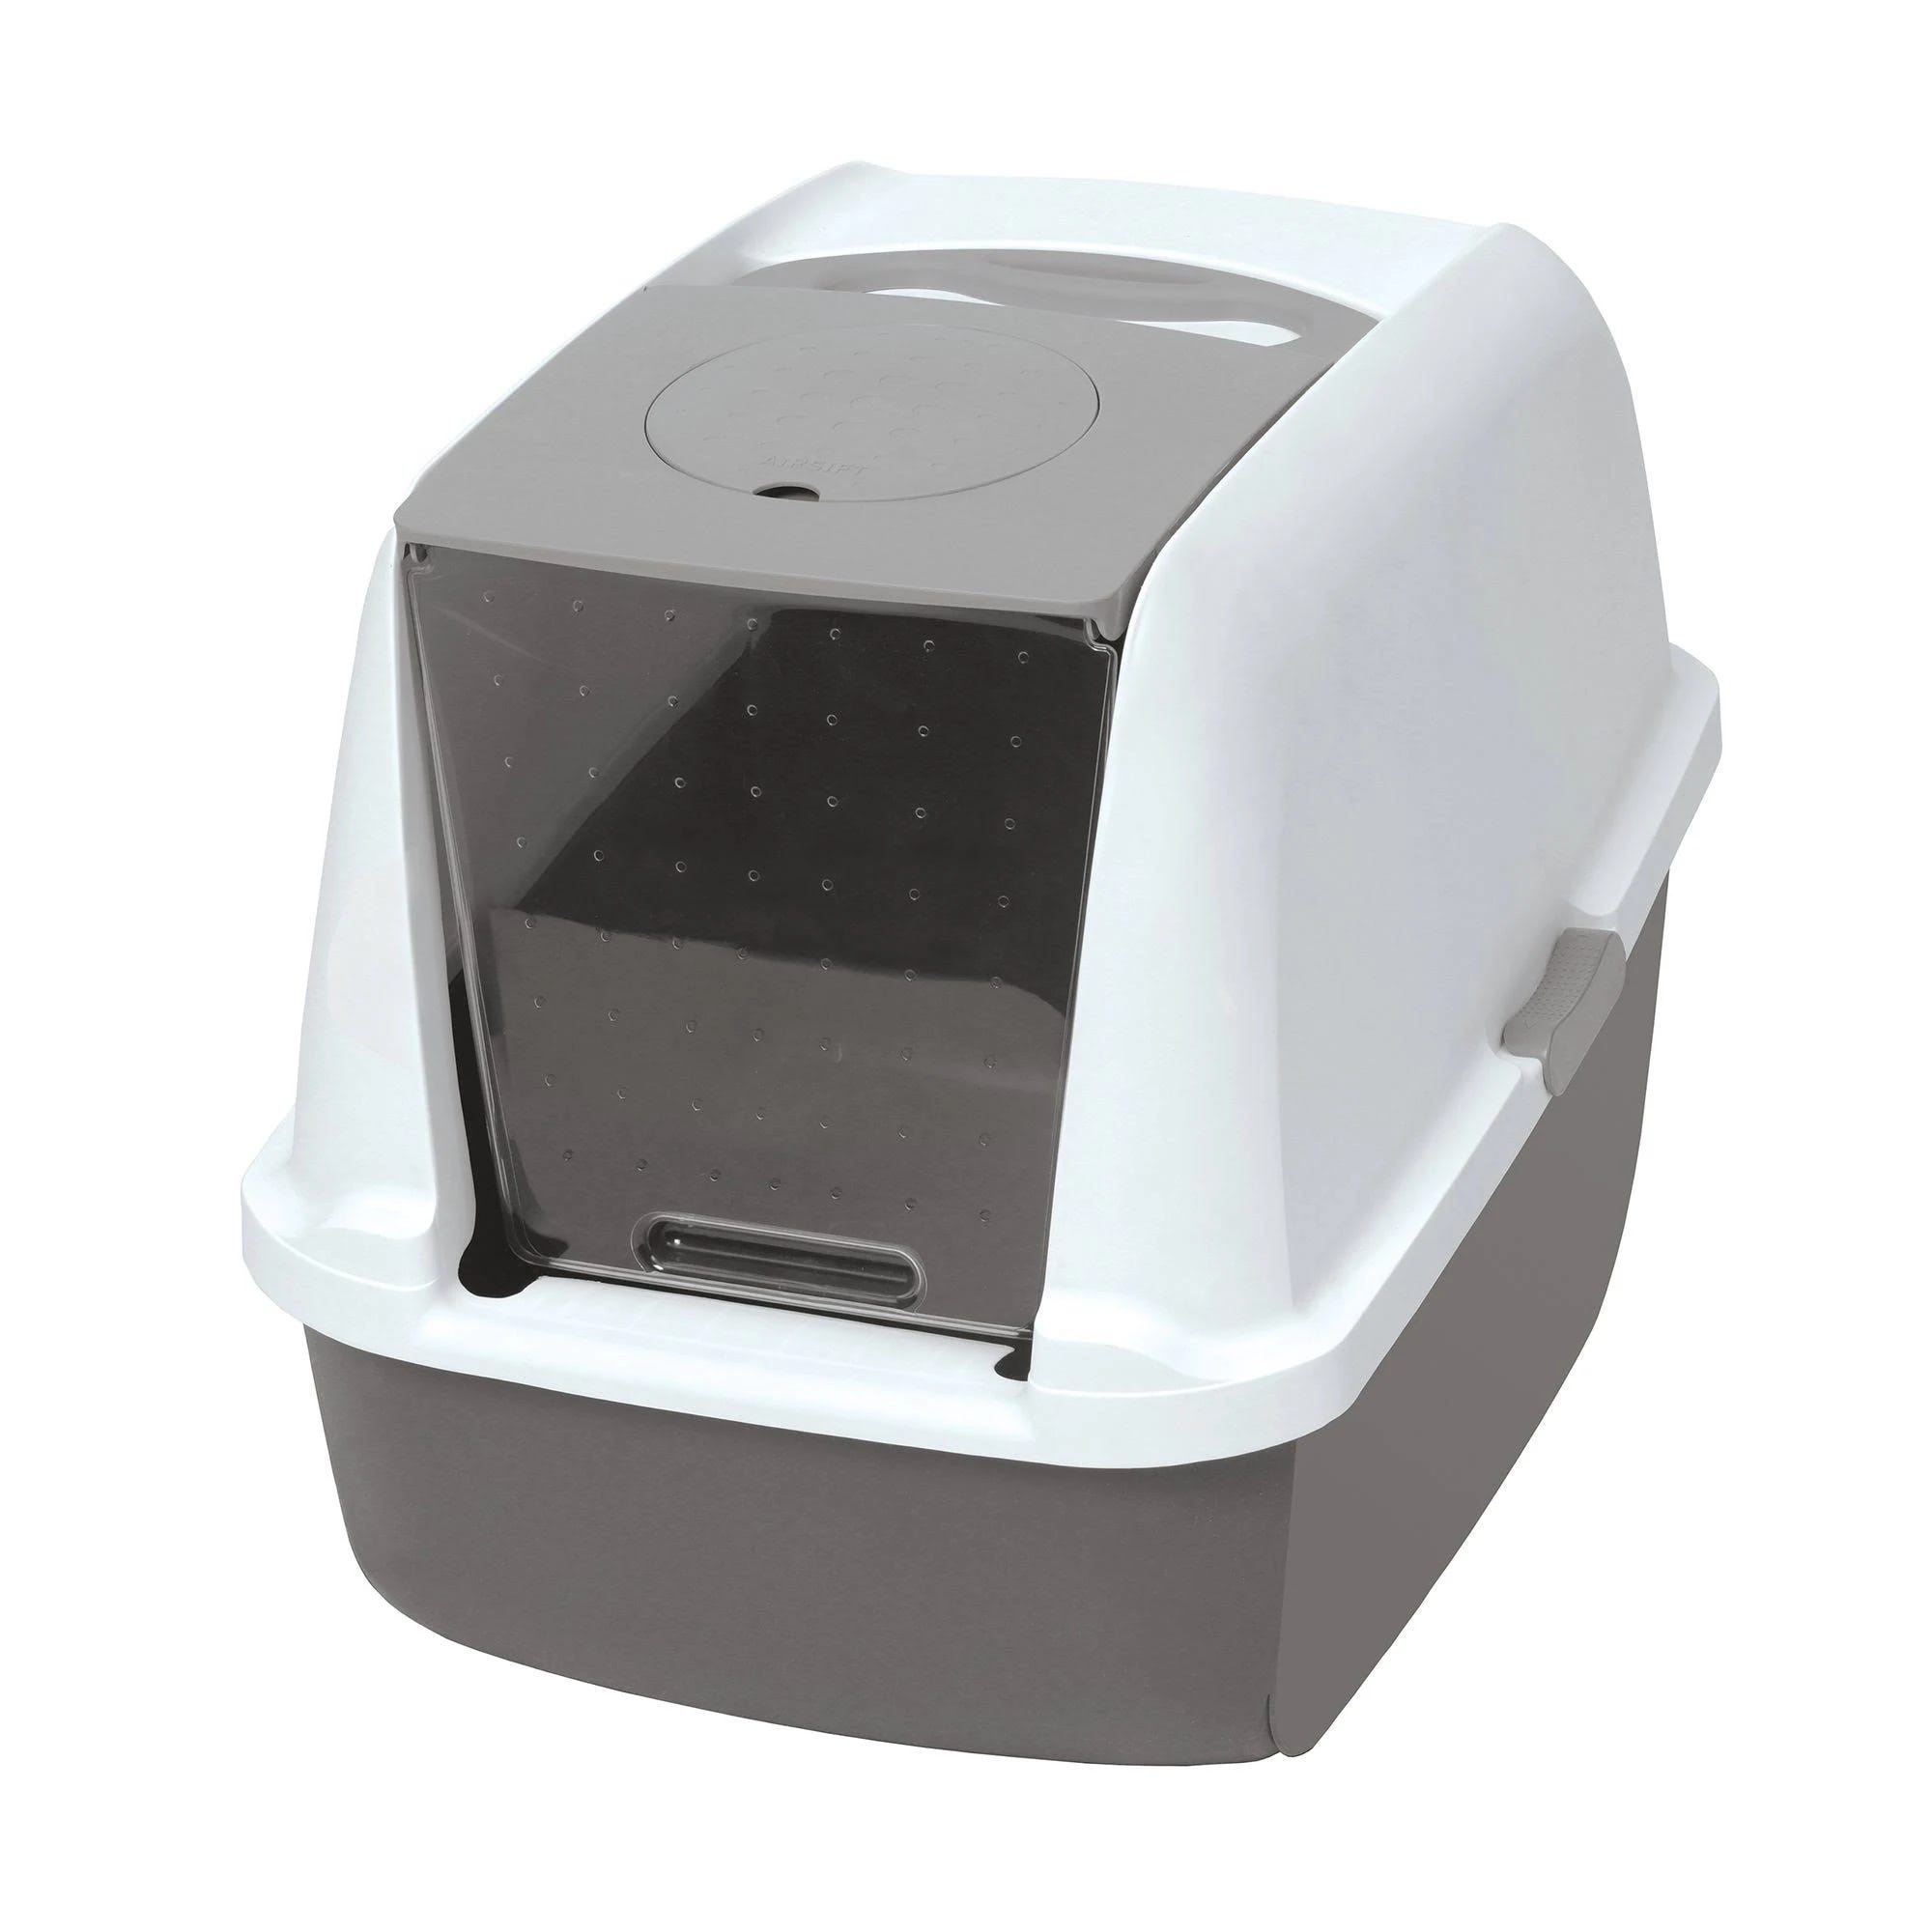 Stylish Hooded Cat Litter Box for Odor-Free Home | Image